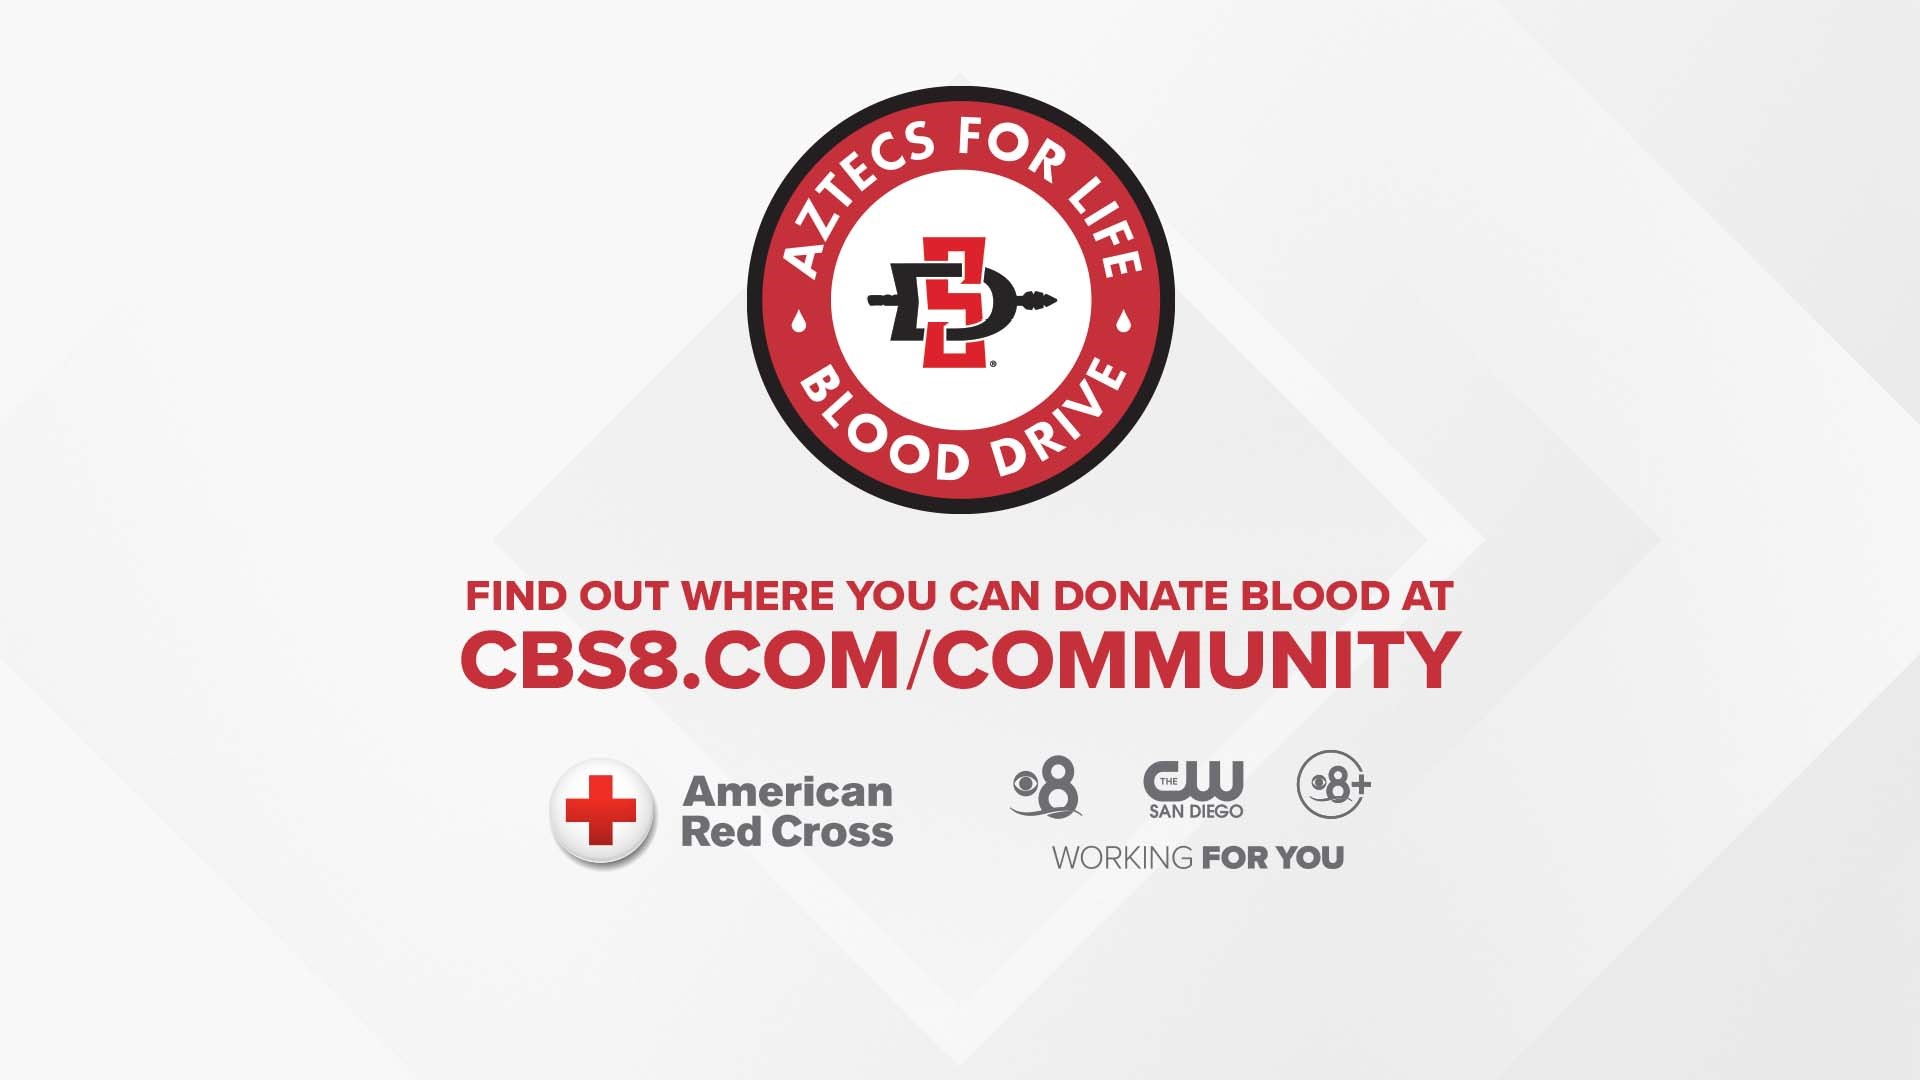 There is a critical need for blood in our community and there are many opportunities to schedule an appointment to donate.